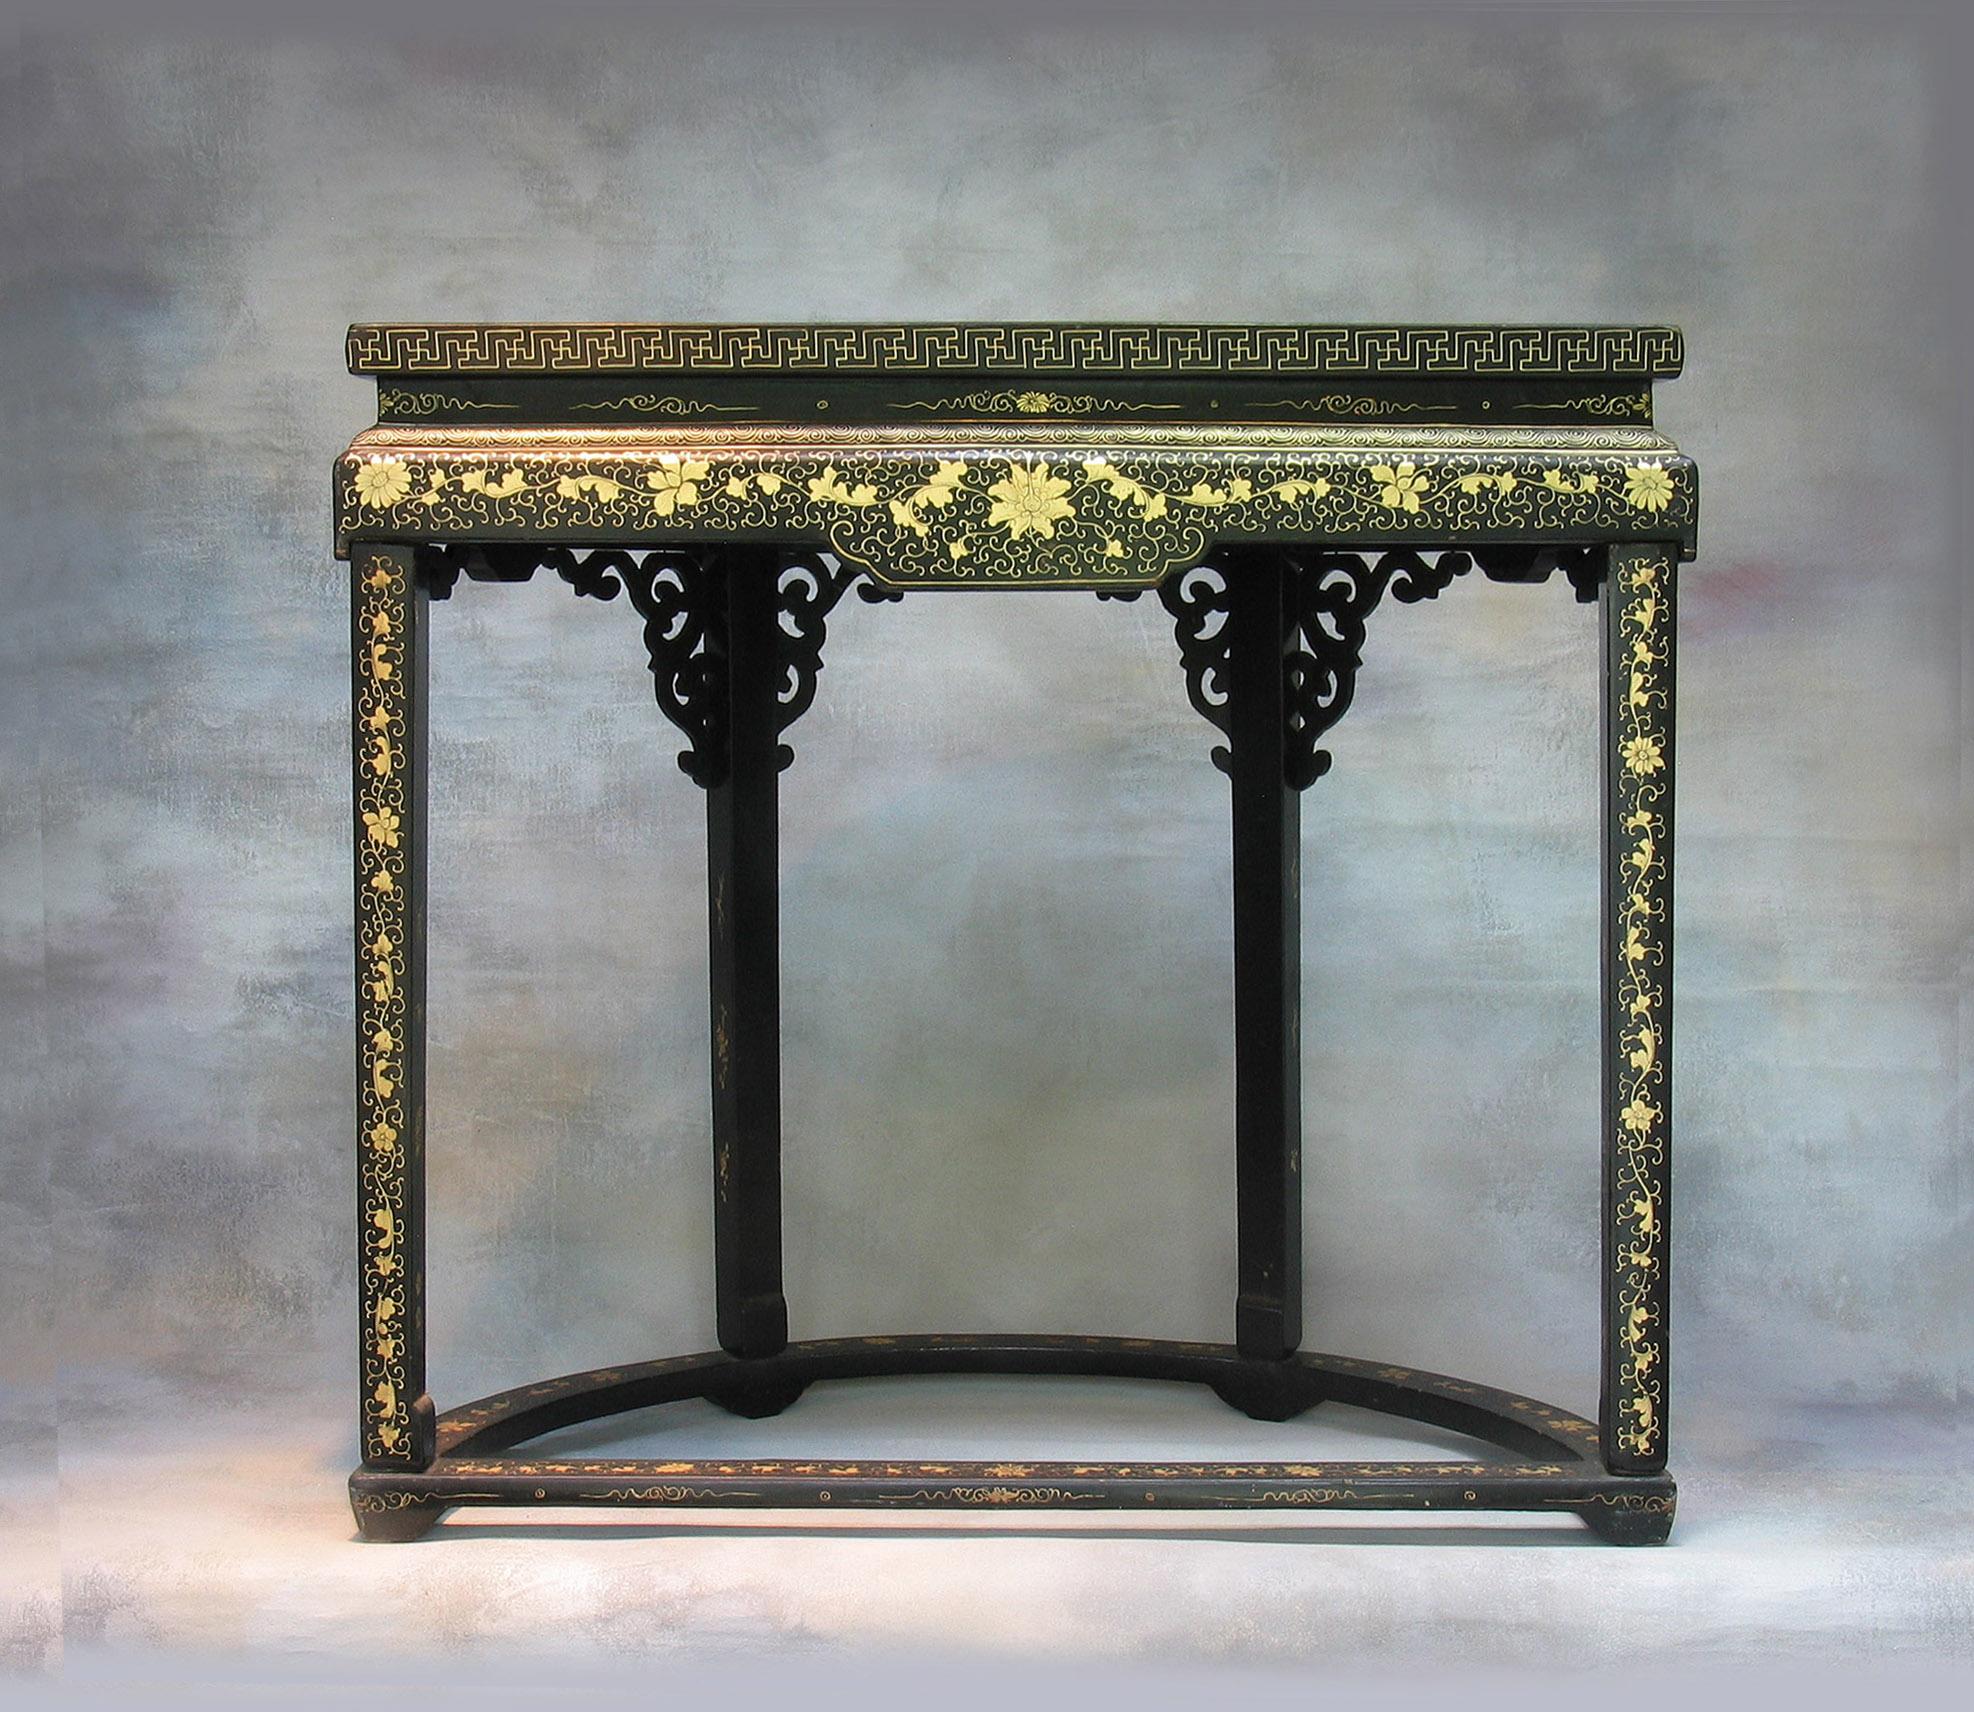 Chinese Export Gilt Lacquer Decorated Demi-lune Console Table Early 19th Century In Good Condition For Sale In Ottawa, Ontario